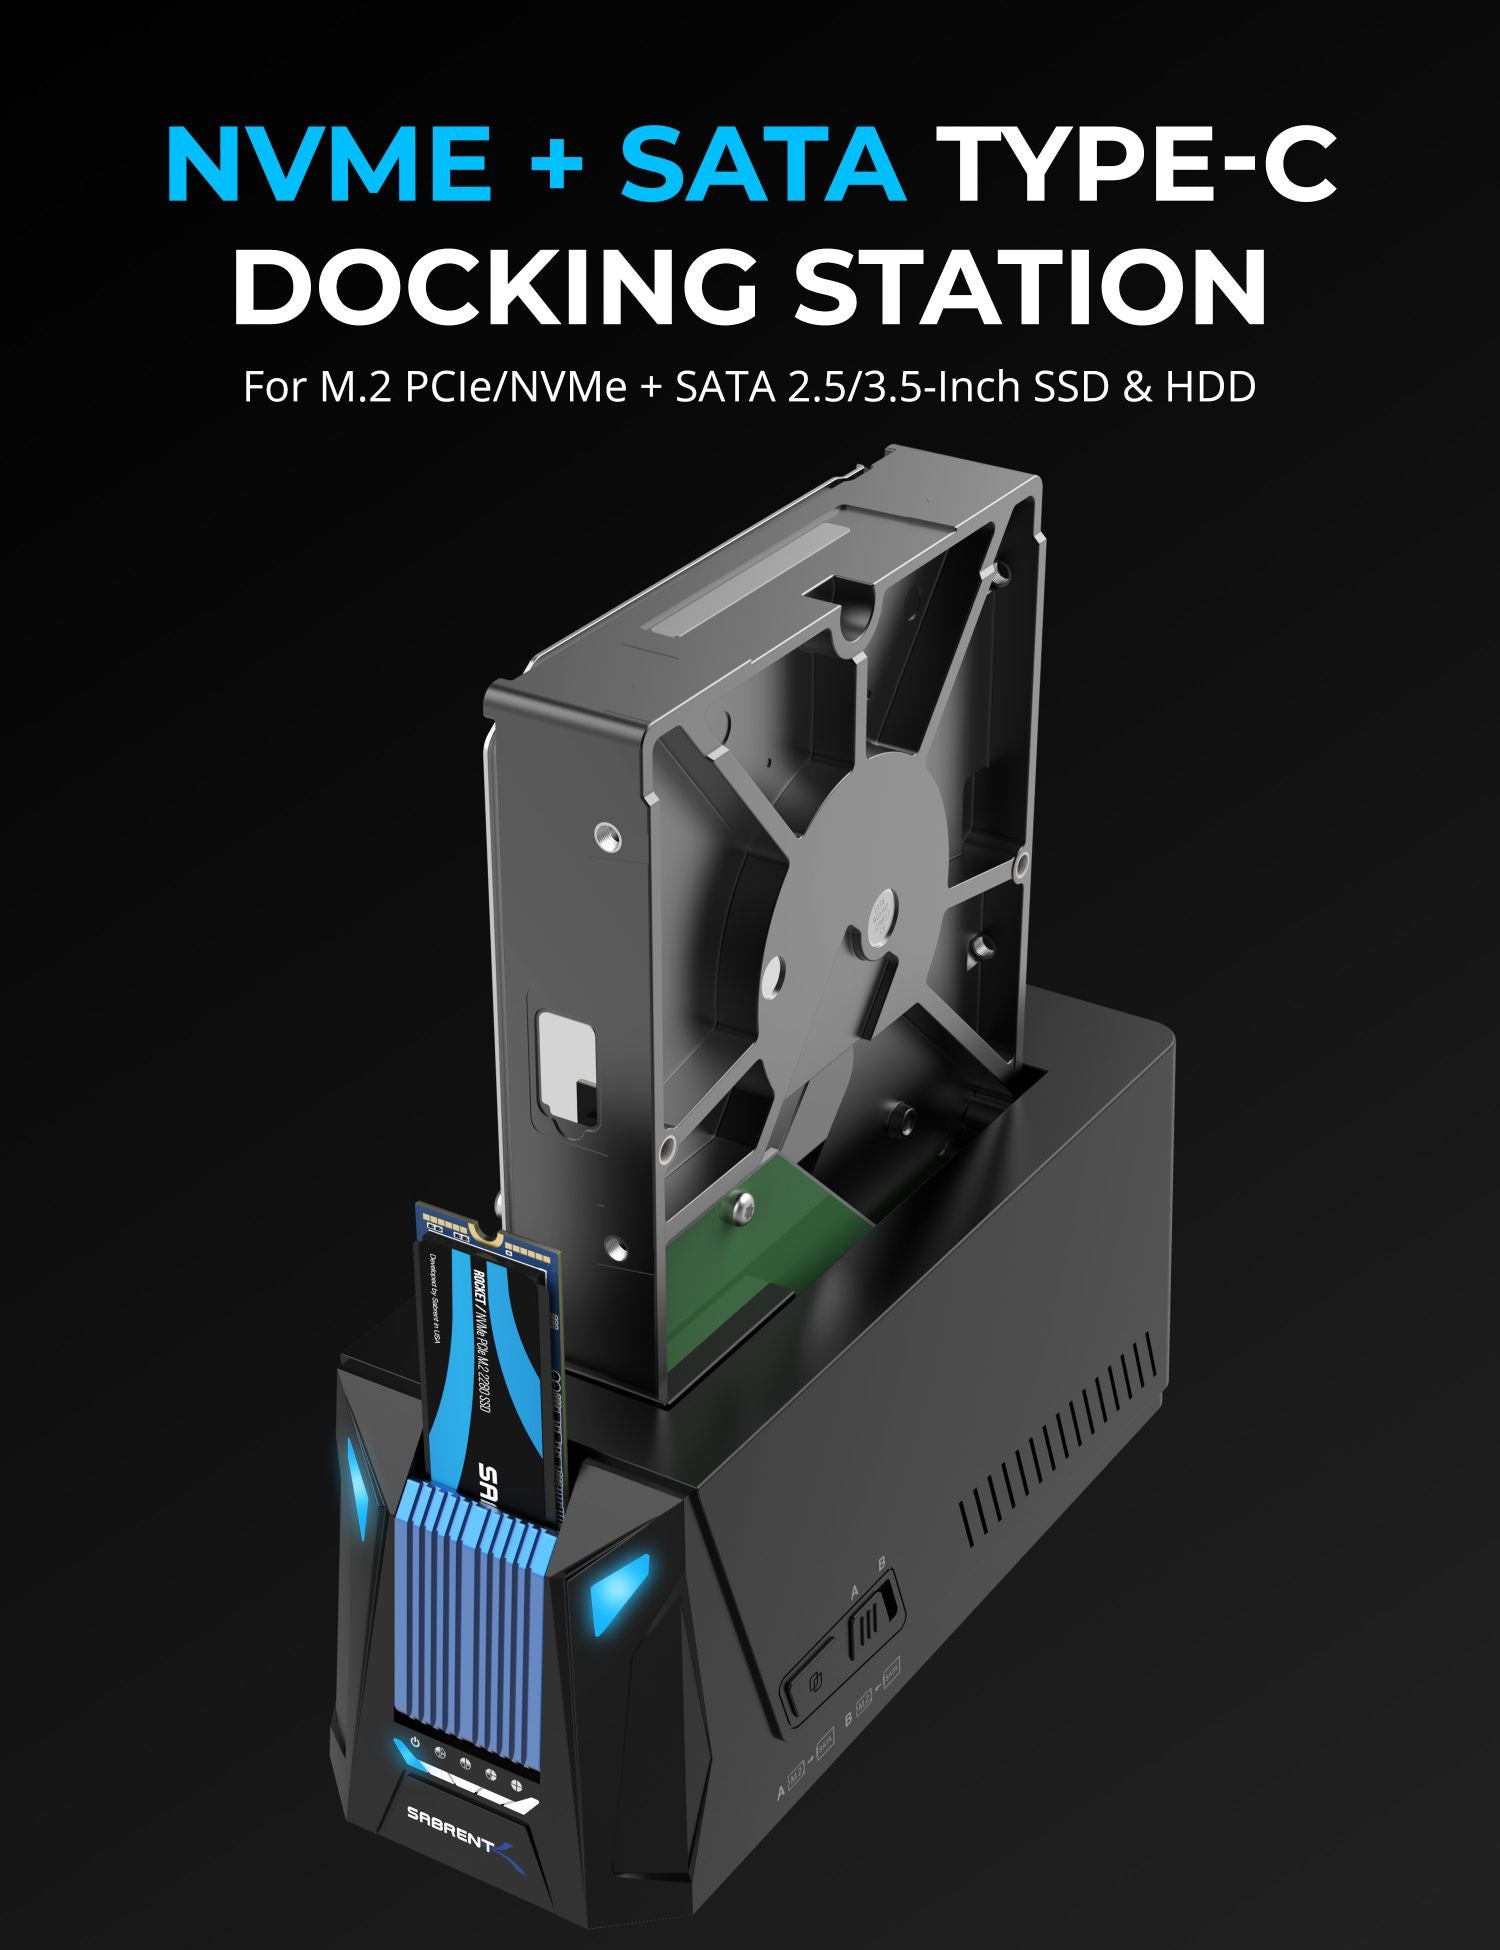 USB-C Docking Station for M.2 PCIe/NVMe and SATA 2.5/3.5-Inch SSD